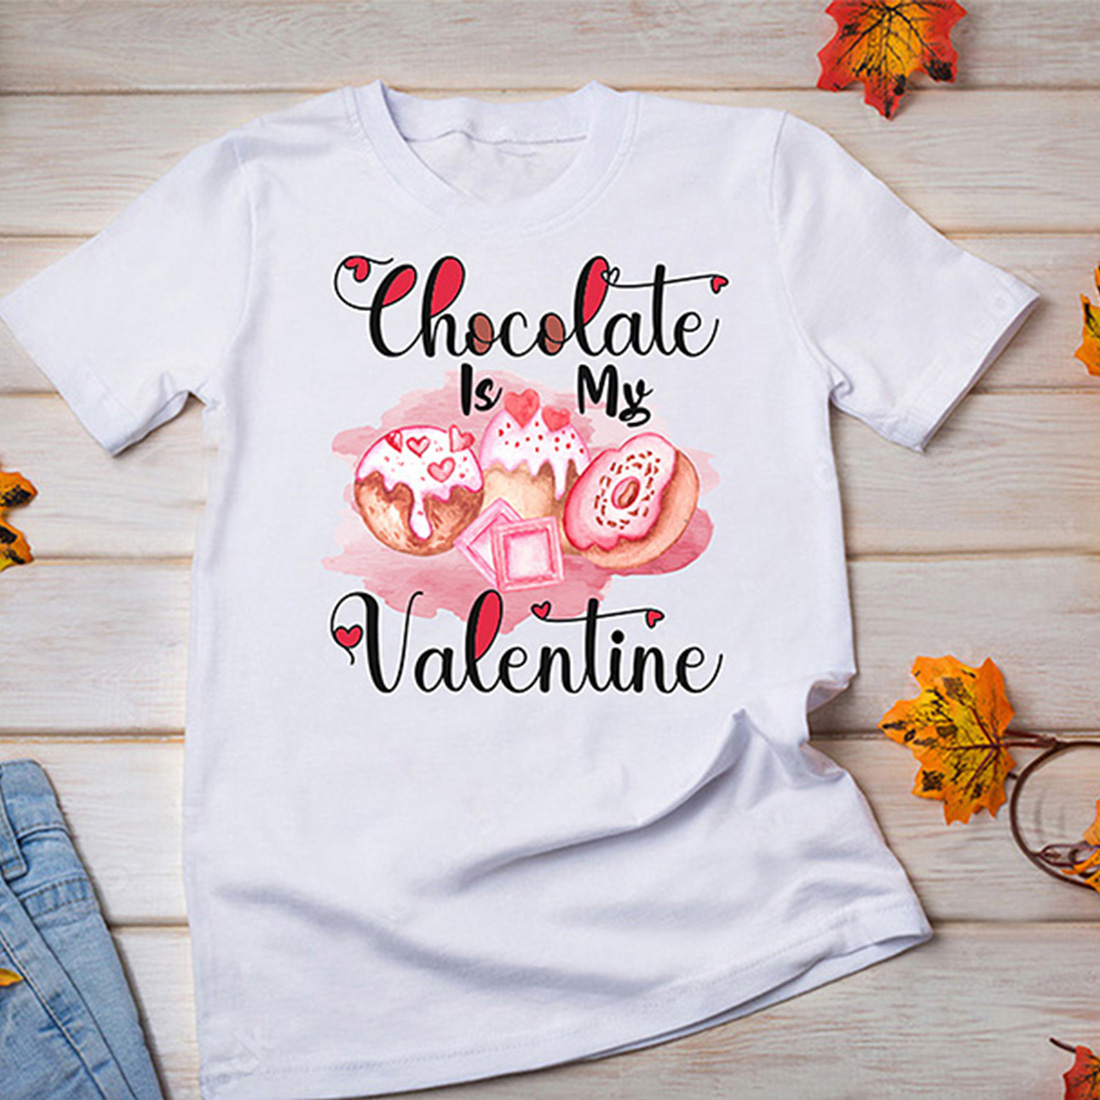 Image of t-shirt with adorable print on Valentines Day theme